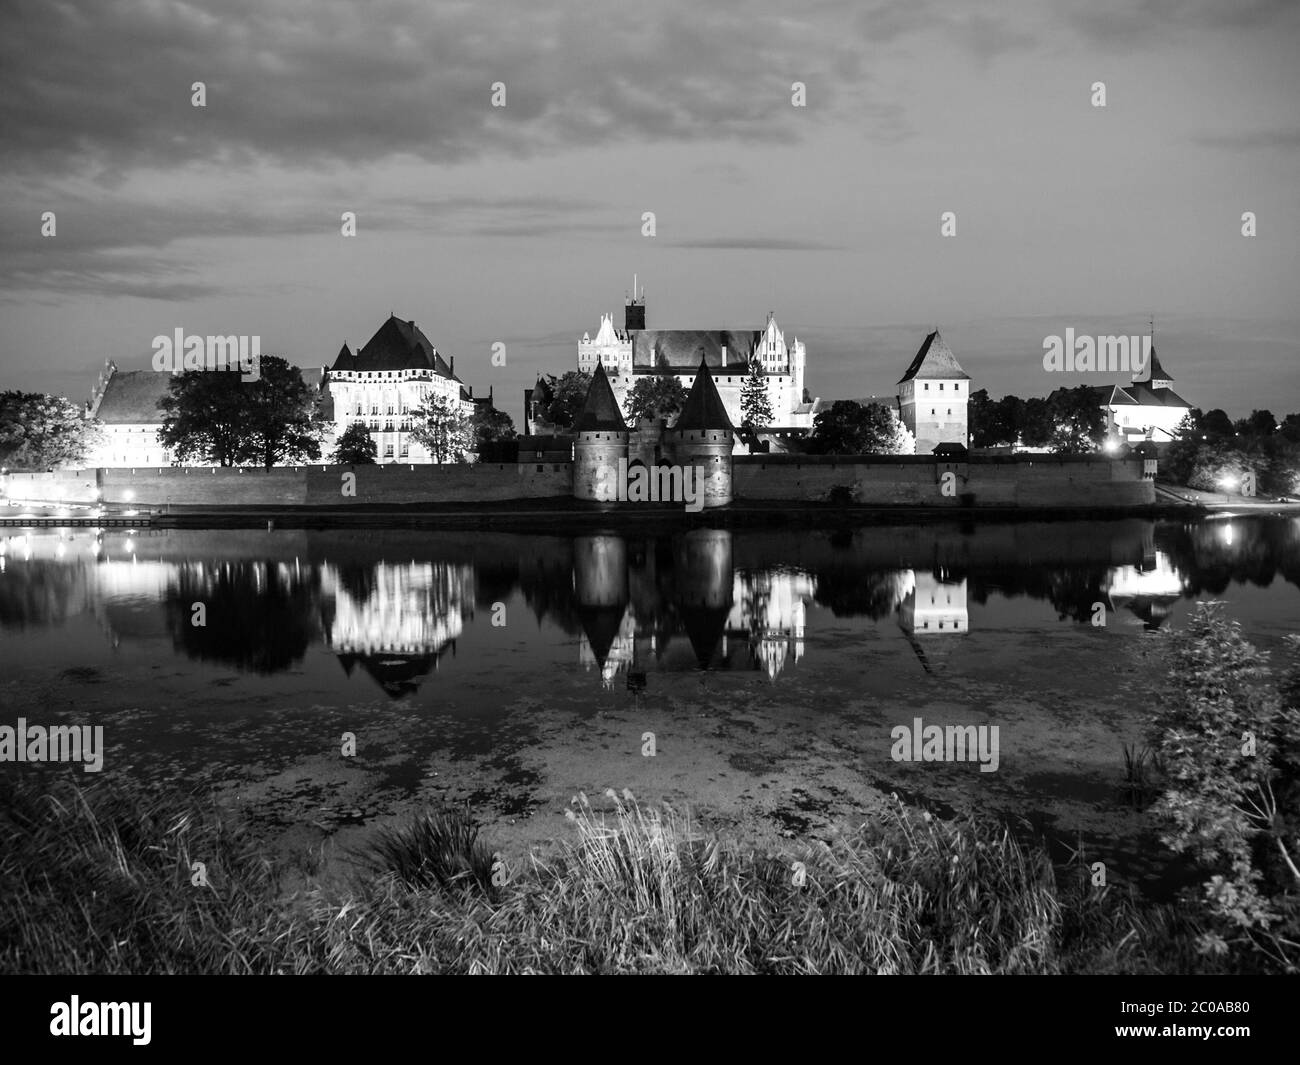 Malbork Castle by night with reflection in Nogat river, Poland. Black and white image. Stock Photo